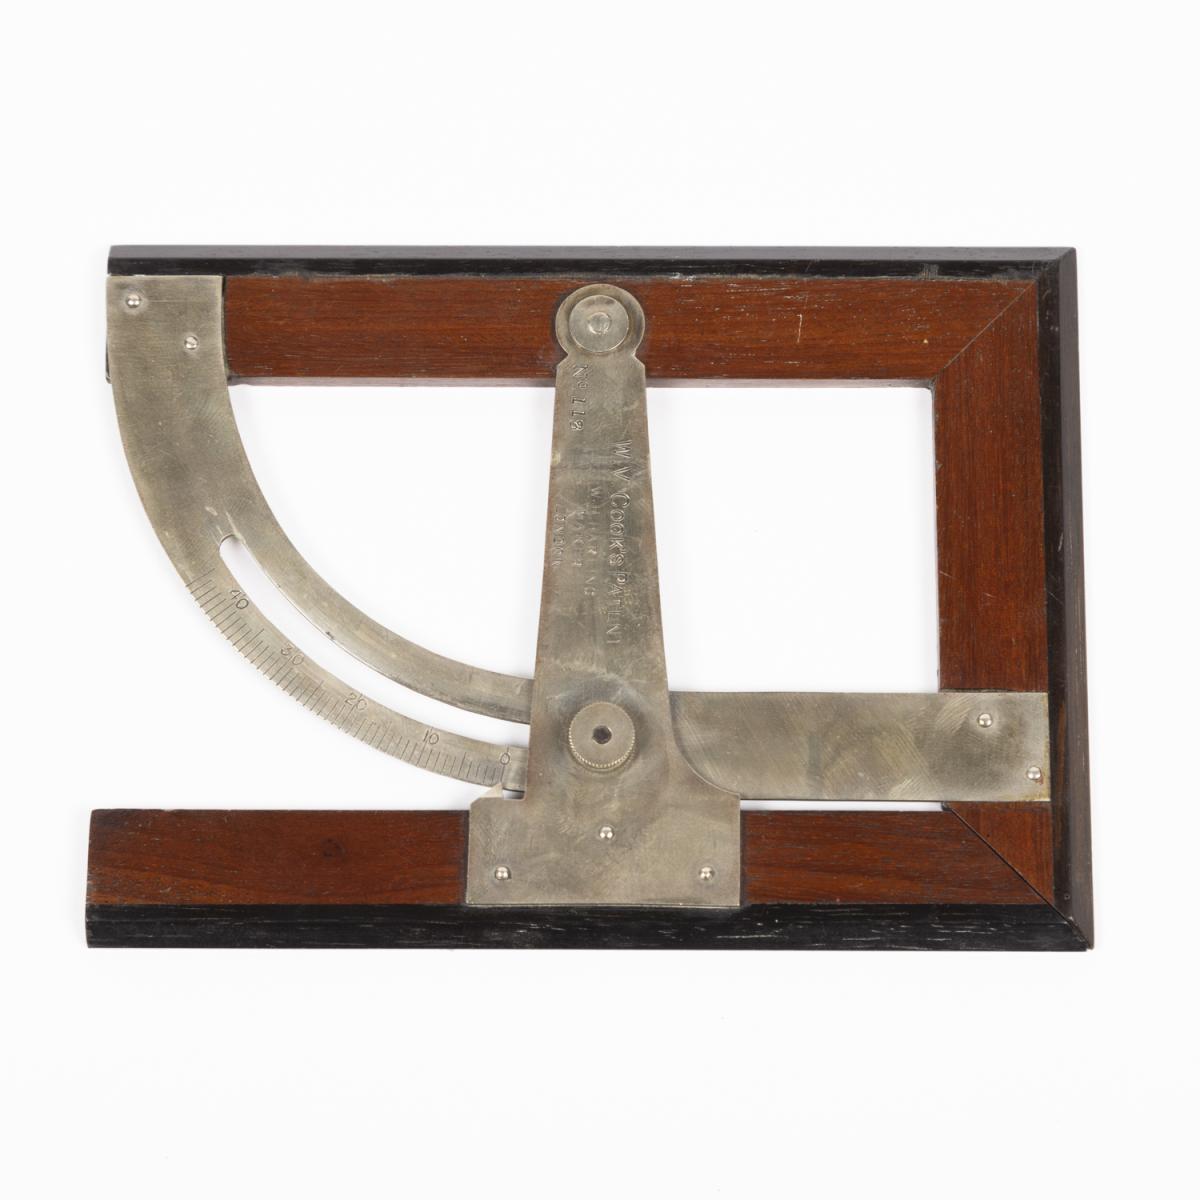 Clinometer by W. H. Harling